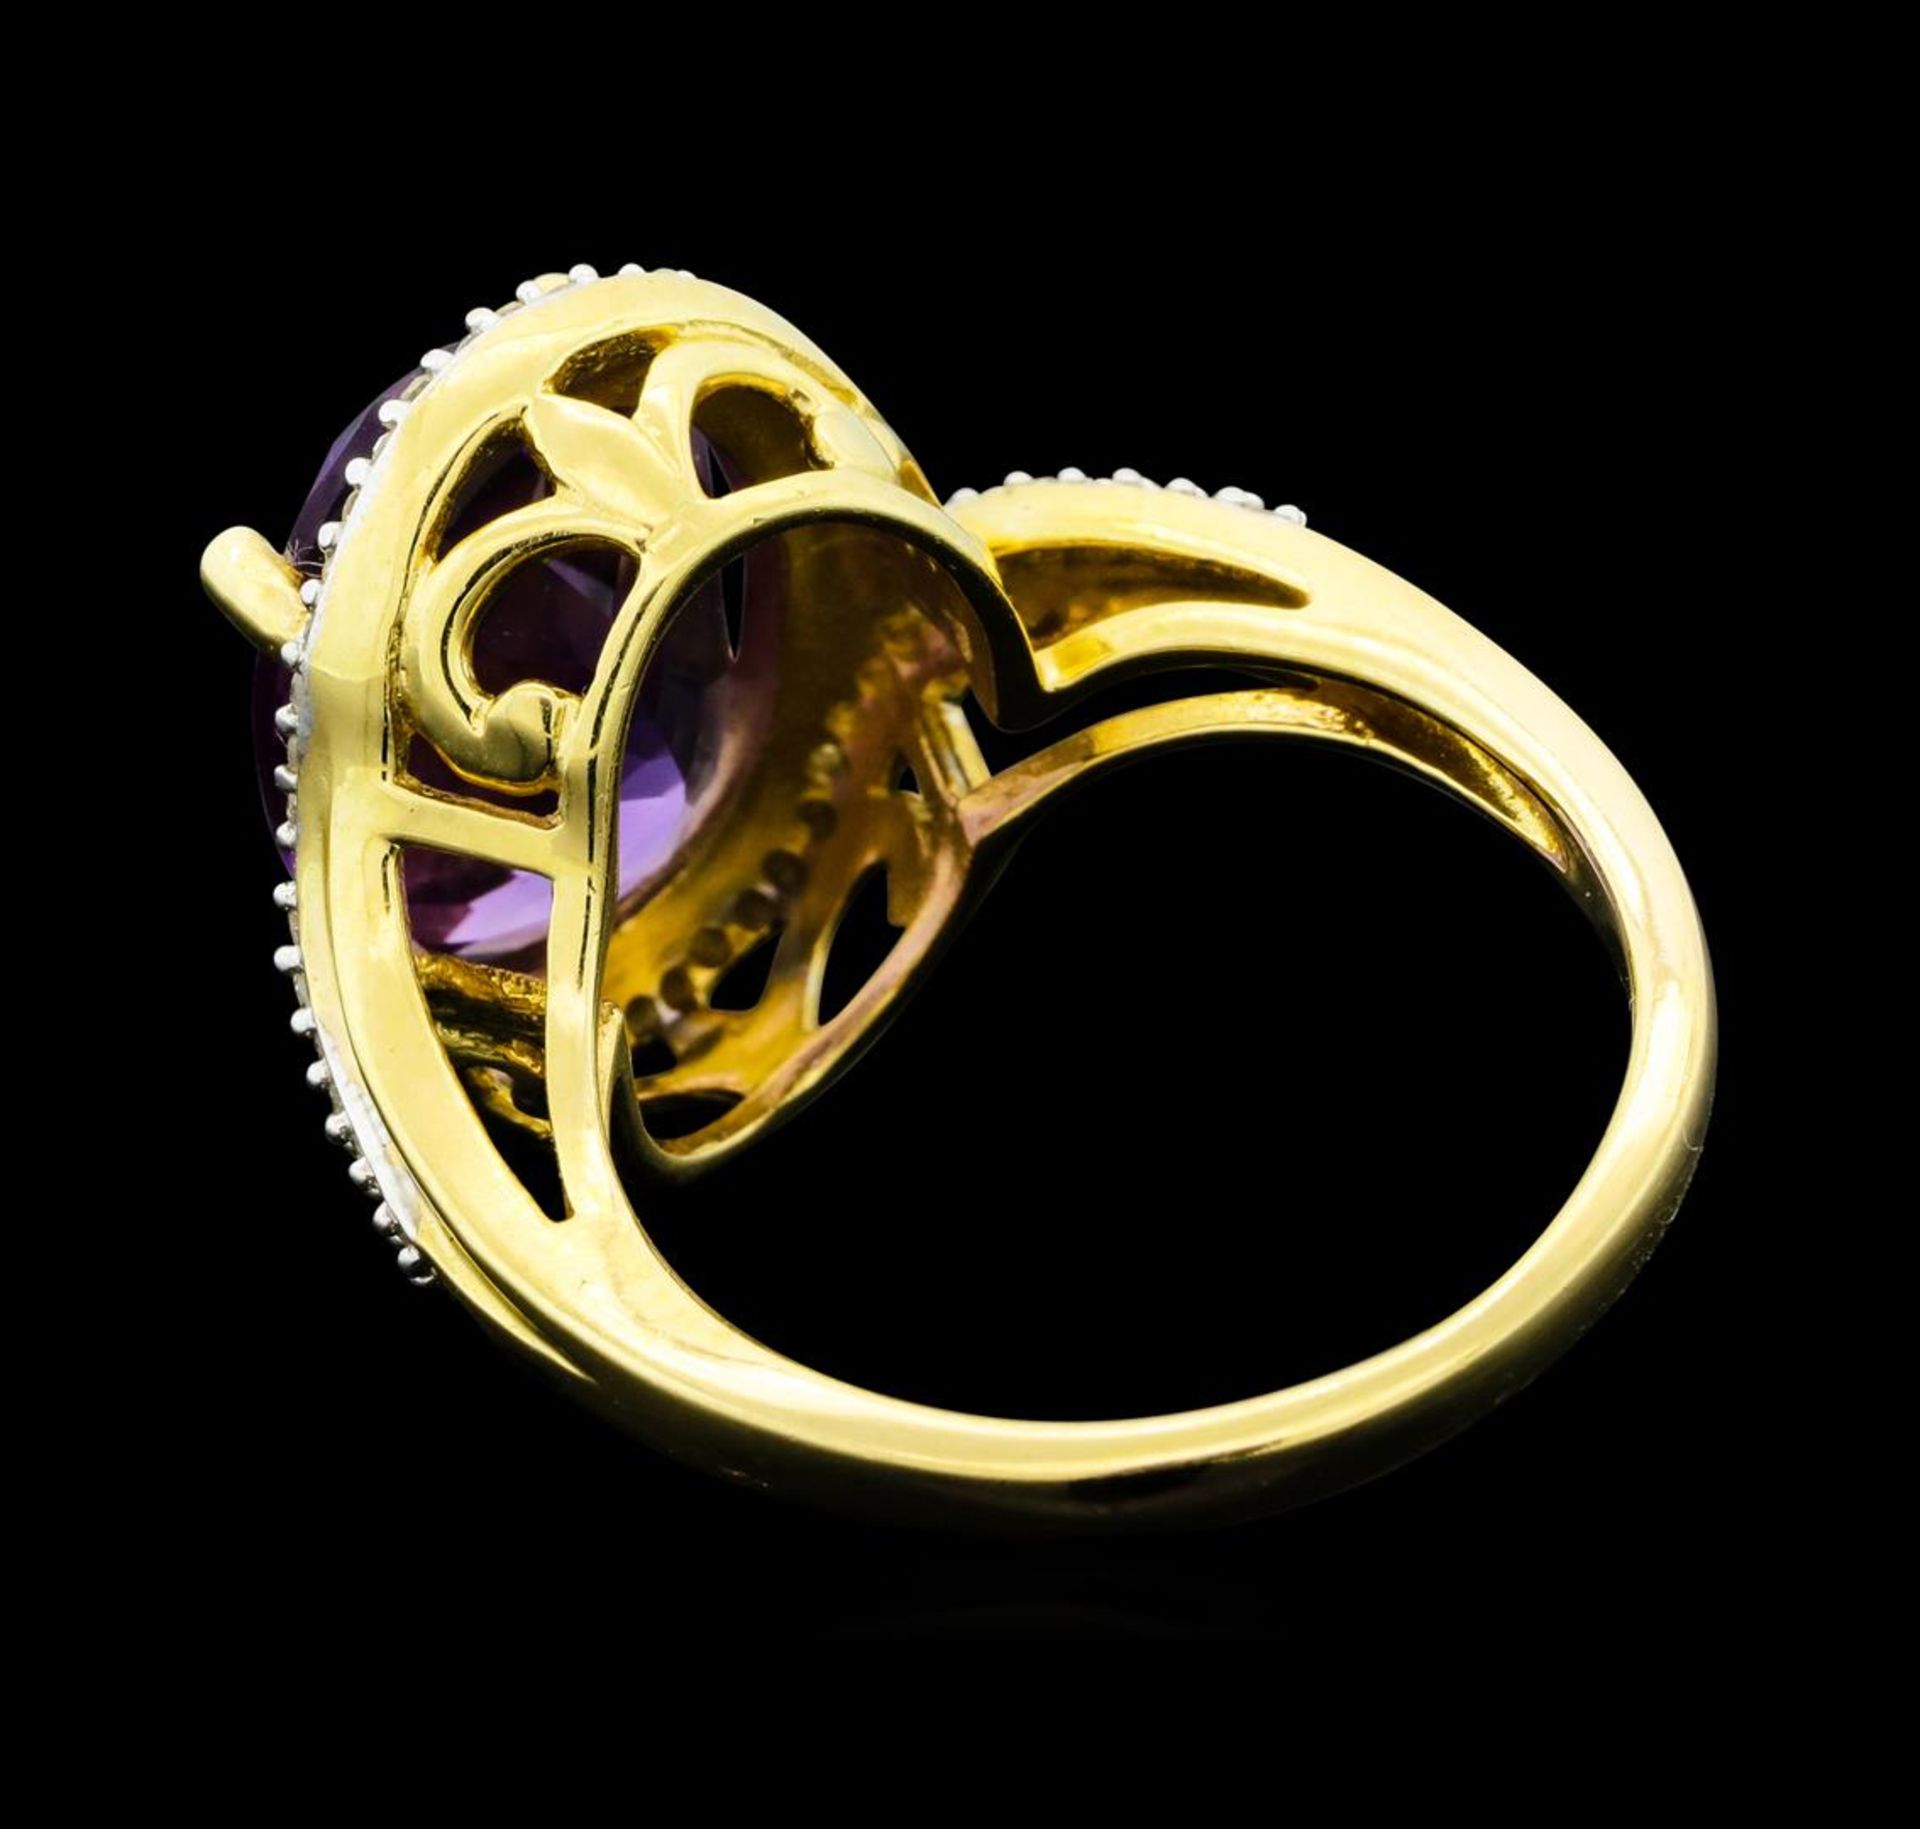 4.90 ctw Amethyst And Diamond Ring - 14KT Yellow Gold - Image 3 of 5